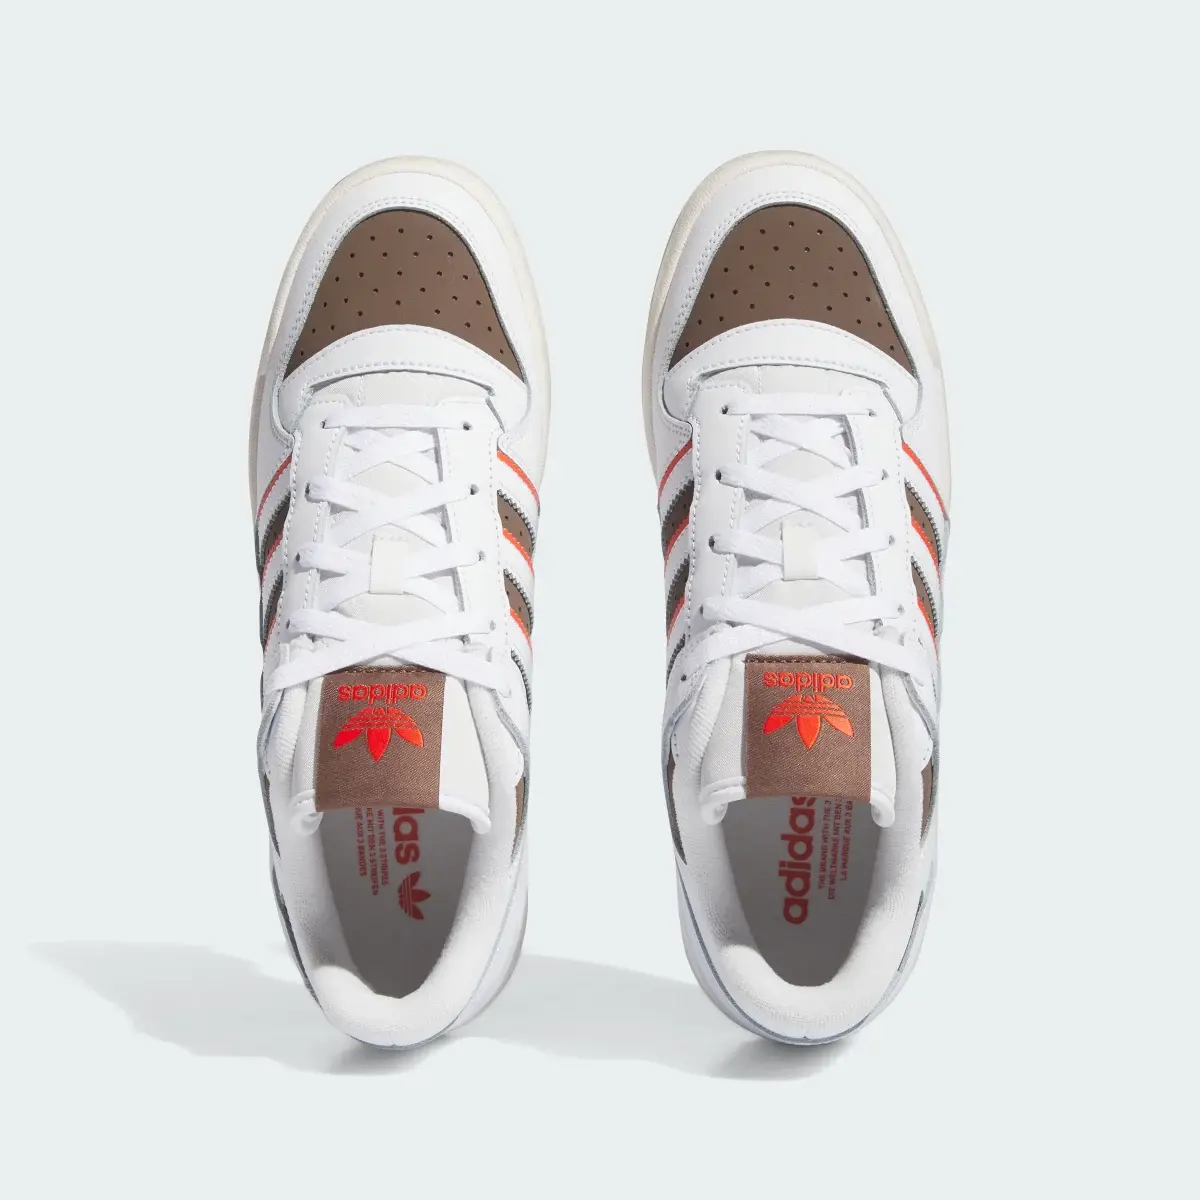 Adidas Forum Low CL Basketball Shoes. 3